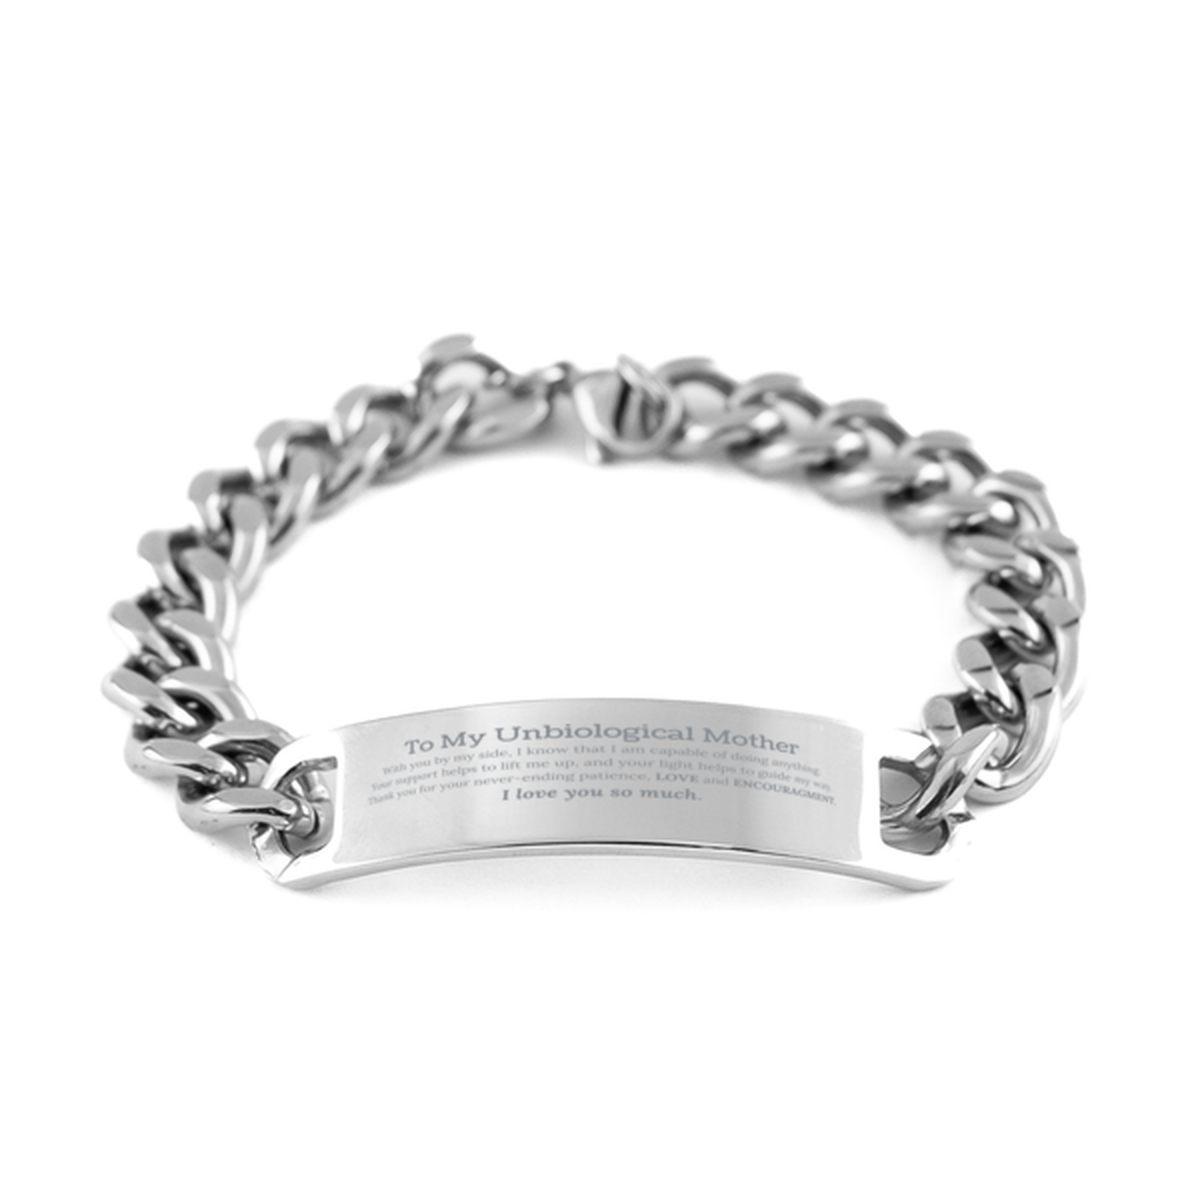 Appreciation Unbiological Mother Cuban Chain Stainless Steel Bracelet Gifts, To My Unbiological Mother Birthday Christmas Wedding Keepsake Gifts for Unbiological Mother With you by my side, I know that I am capable of doing anything. I love you so much